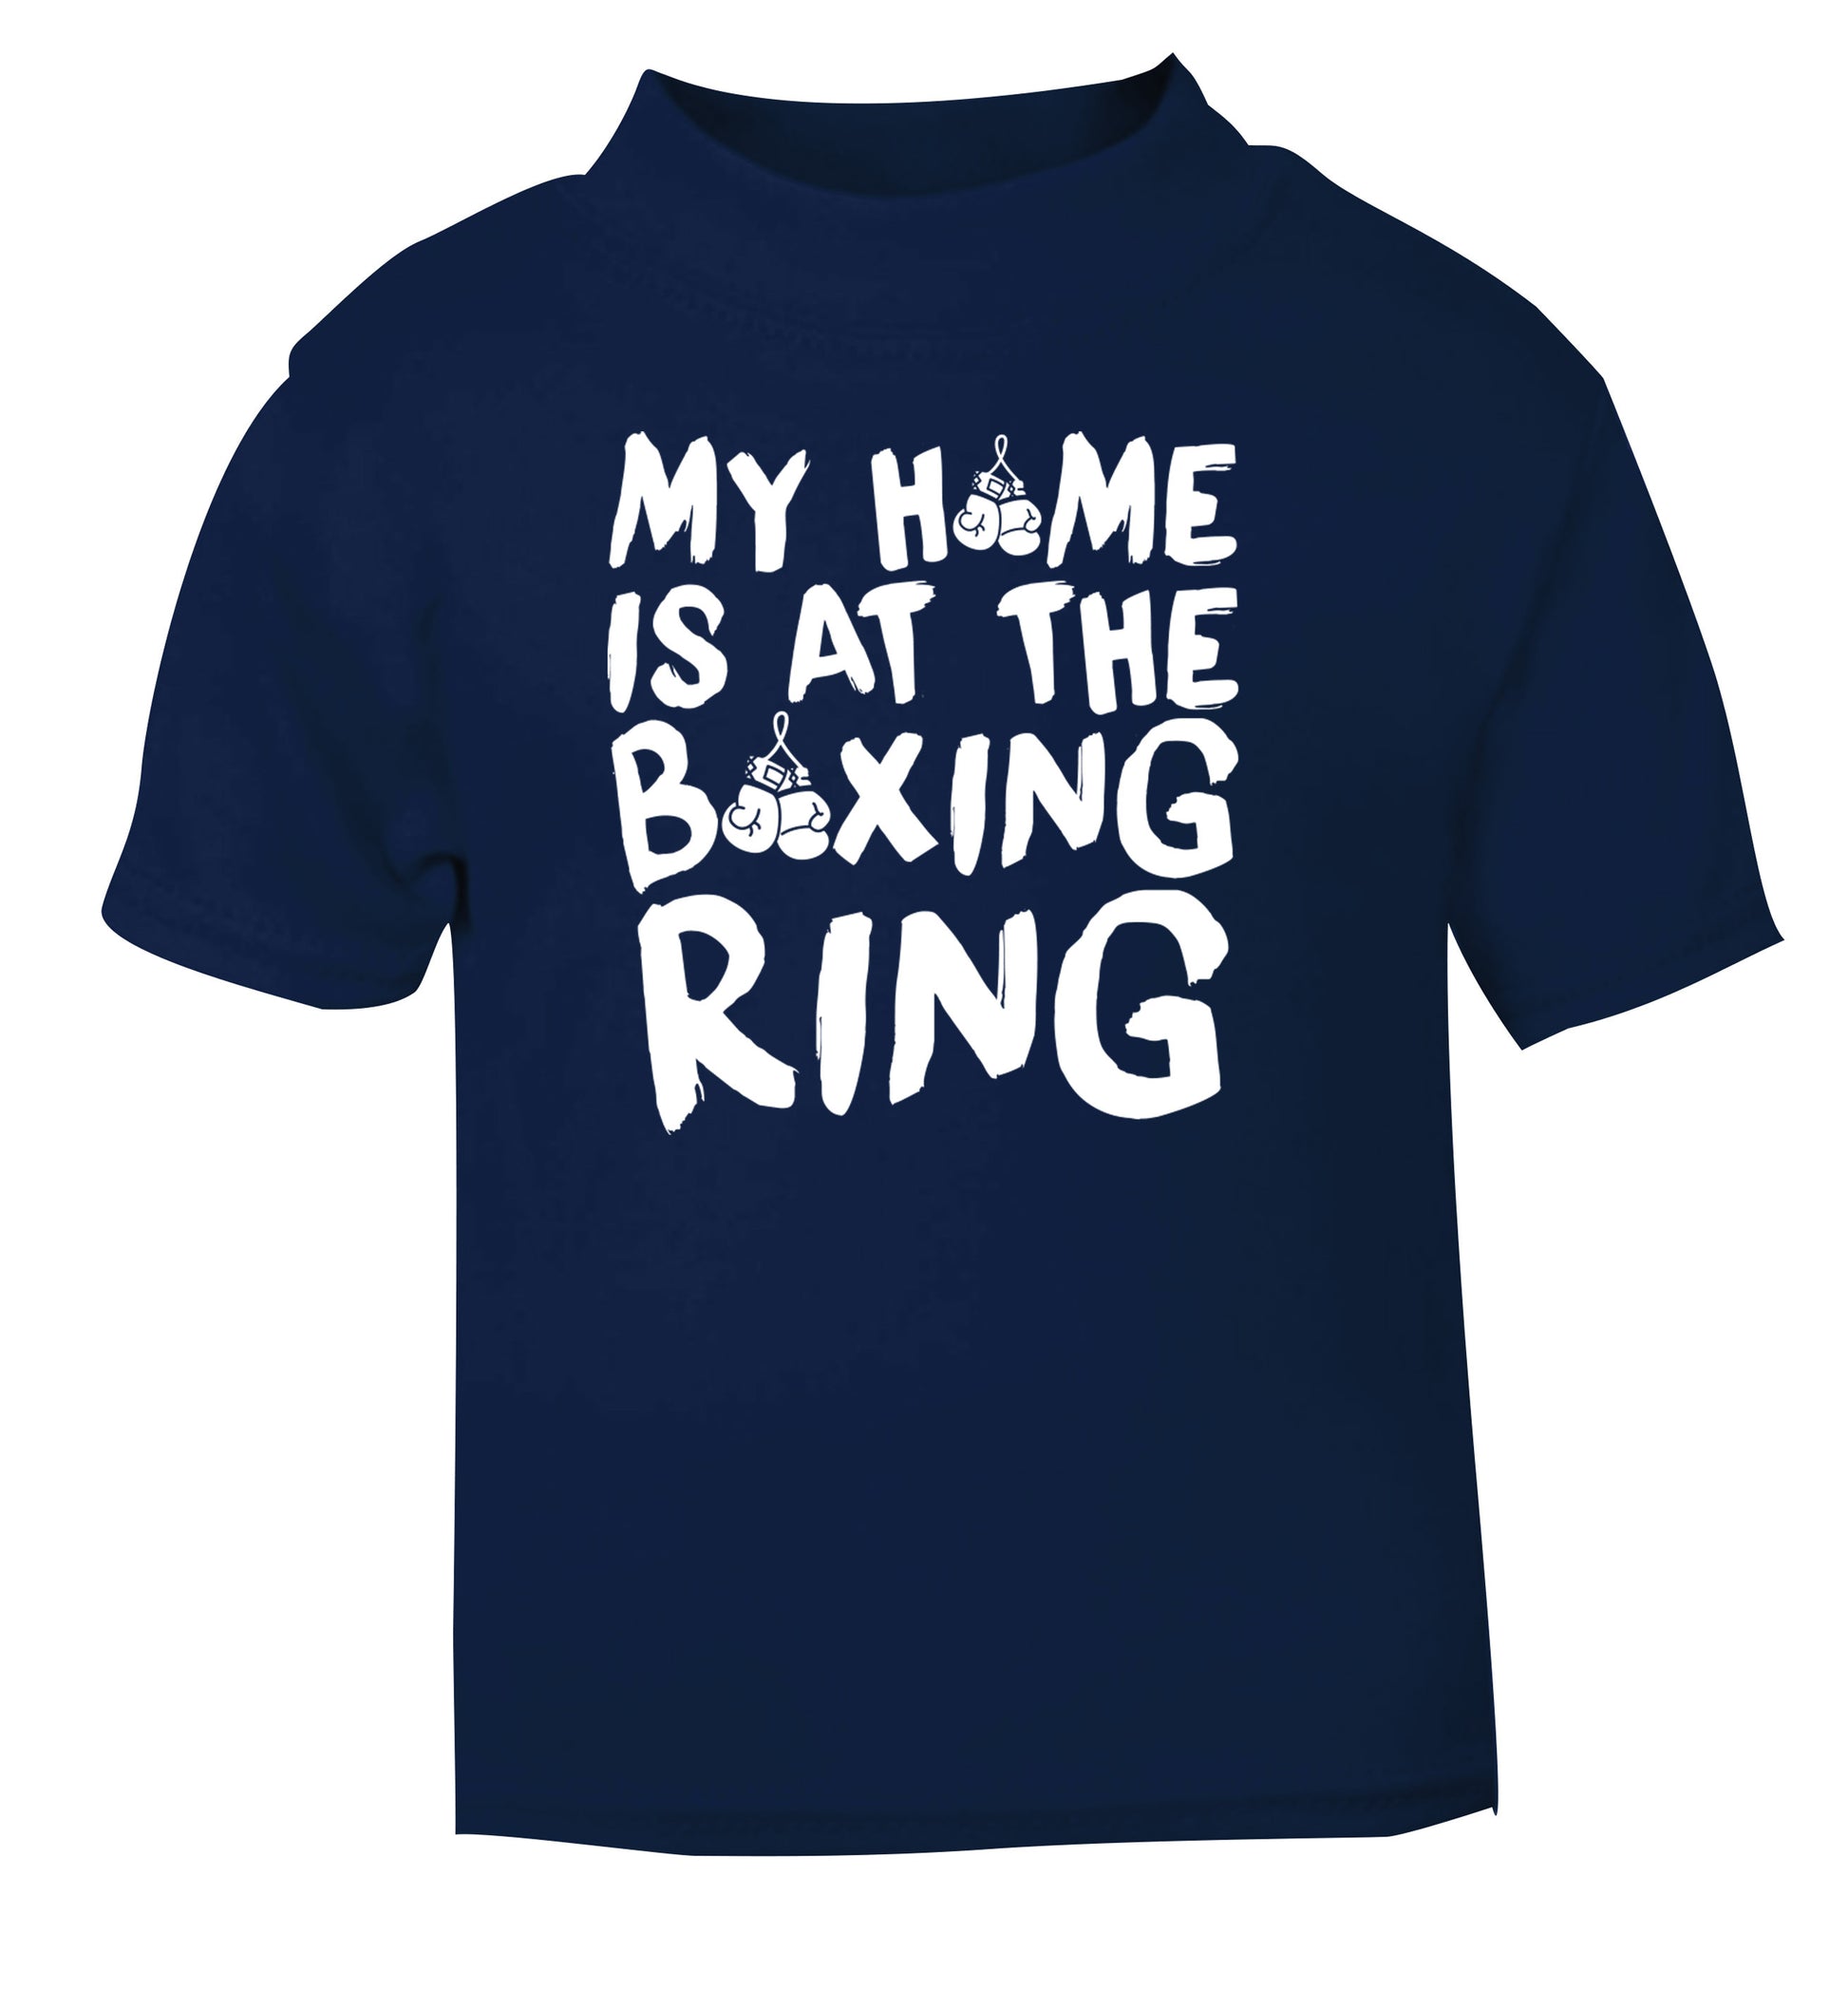 My home is at the boxing ring navy Baby Toddler Tshirt 2 Years